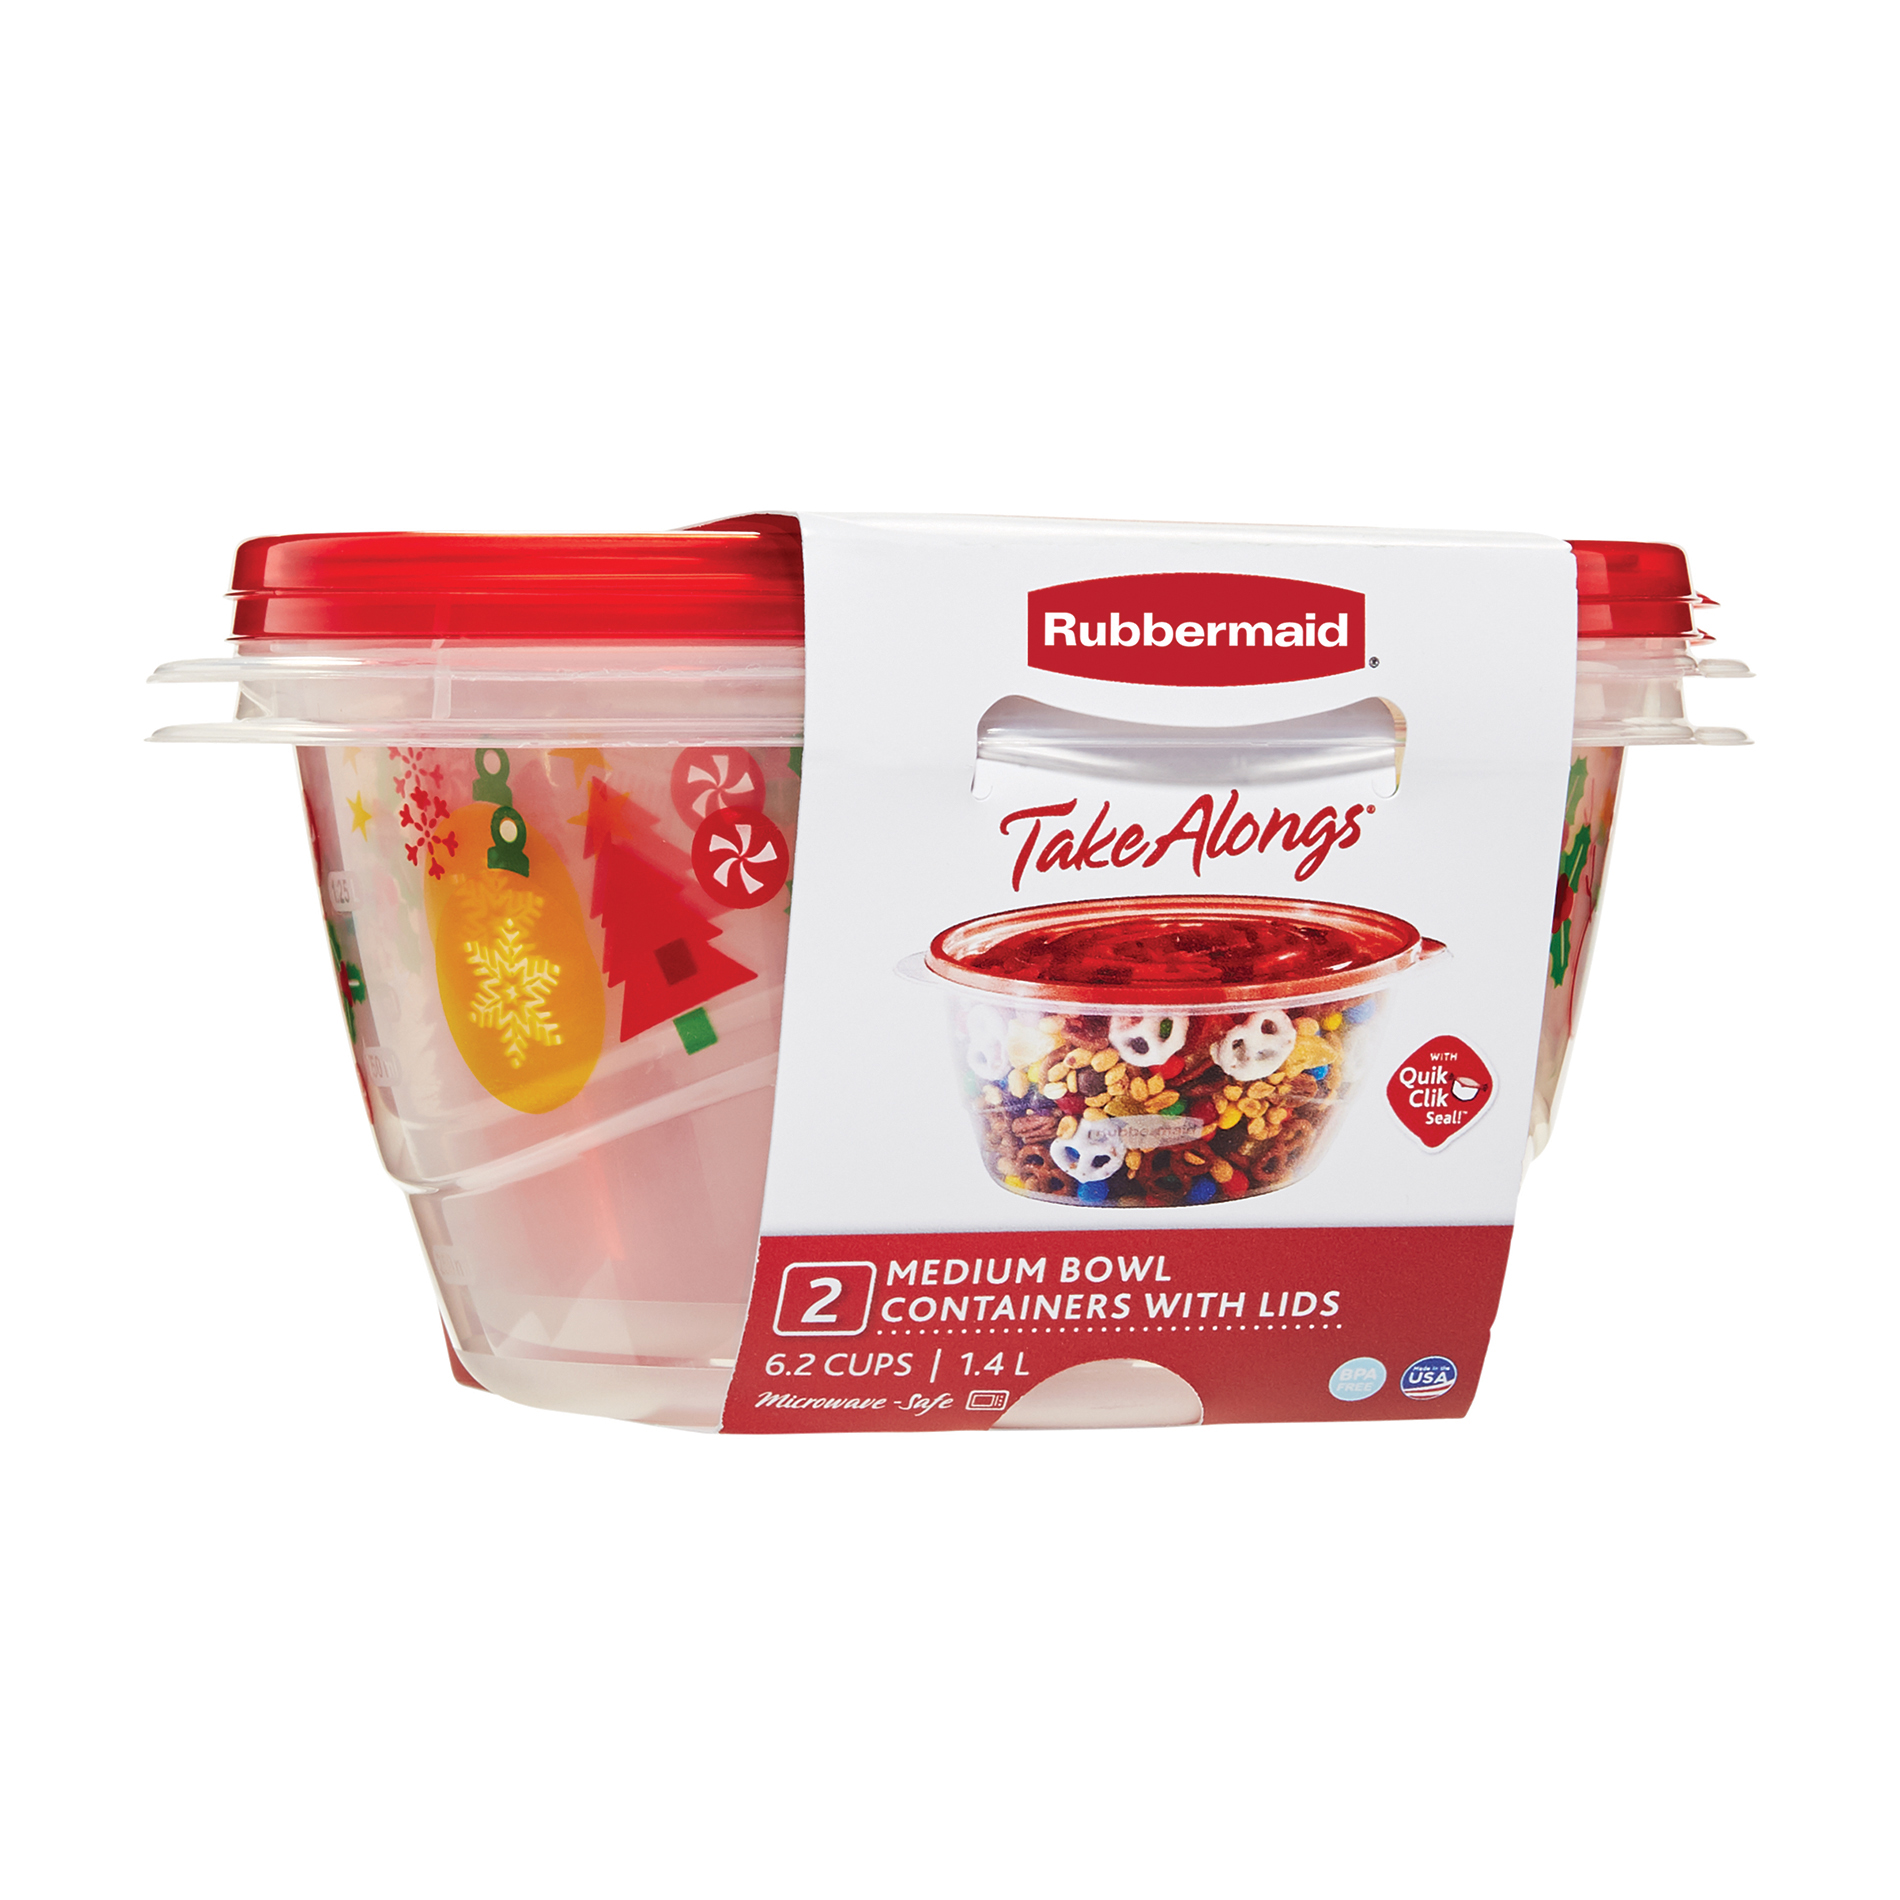 Rubbermaid 2-Pack Holiday Take Alongs Medium Bowl Containers with Lids - Snow